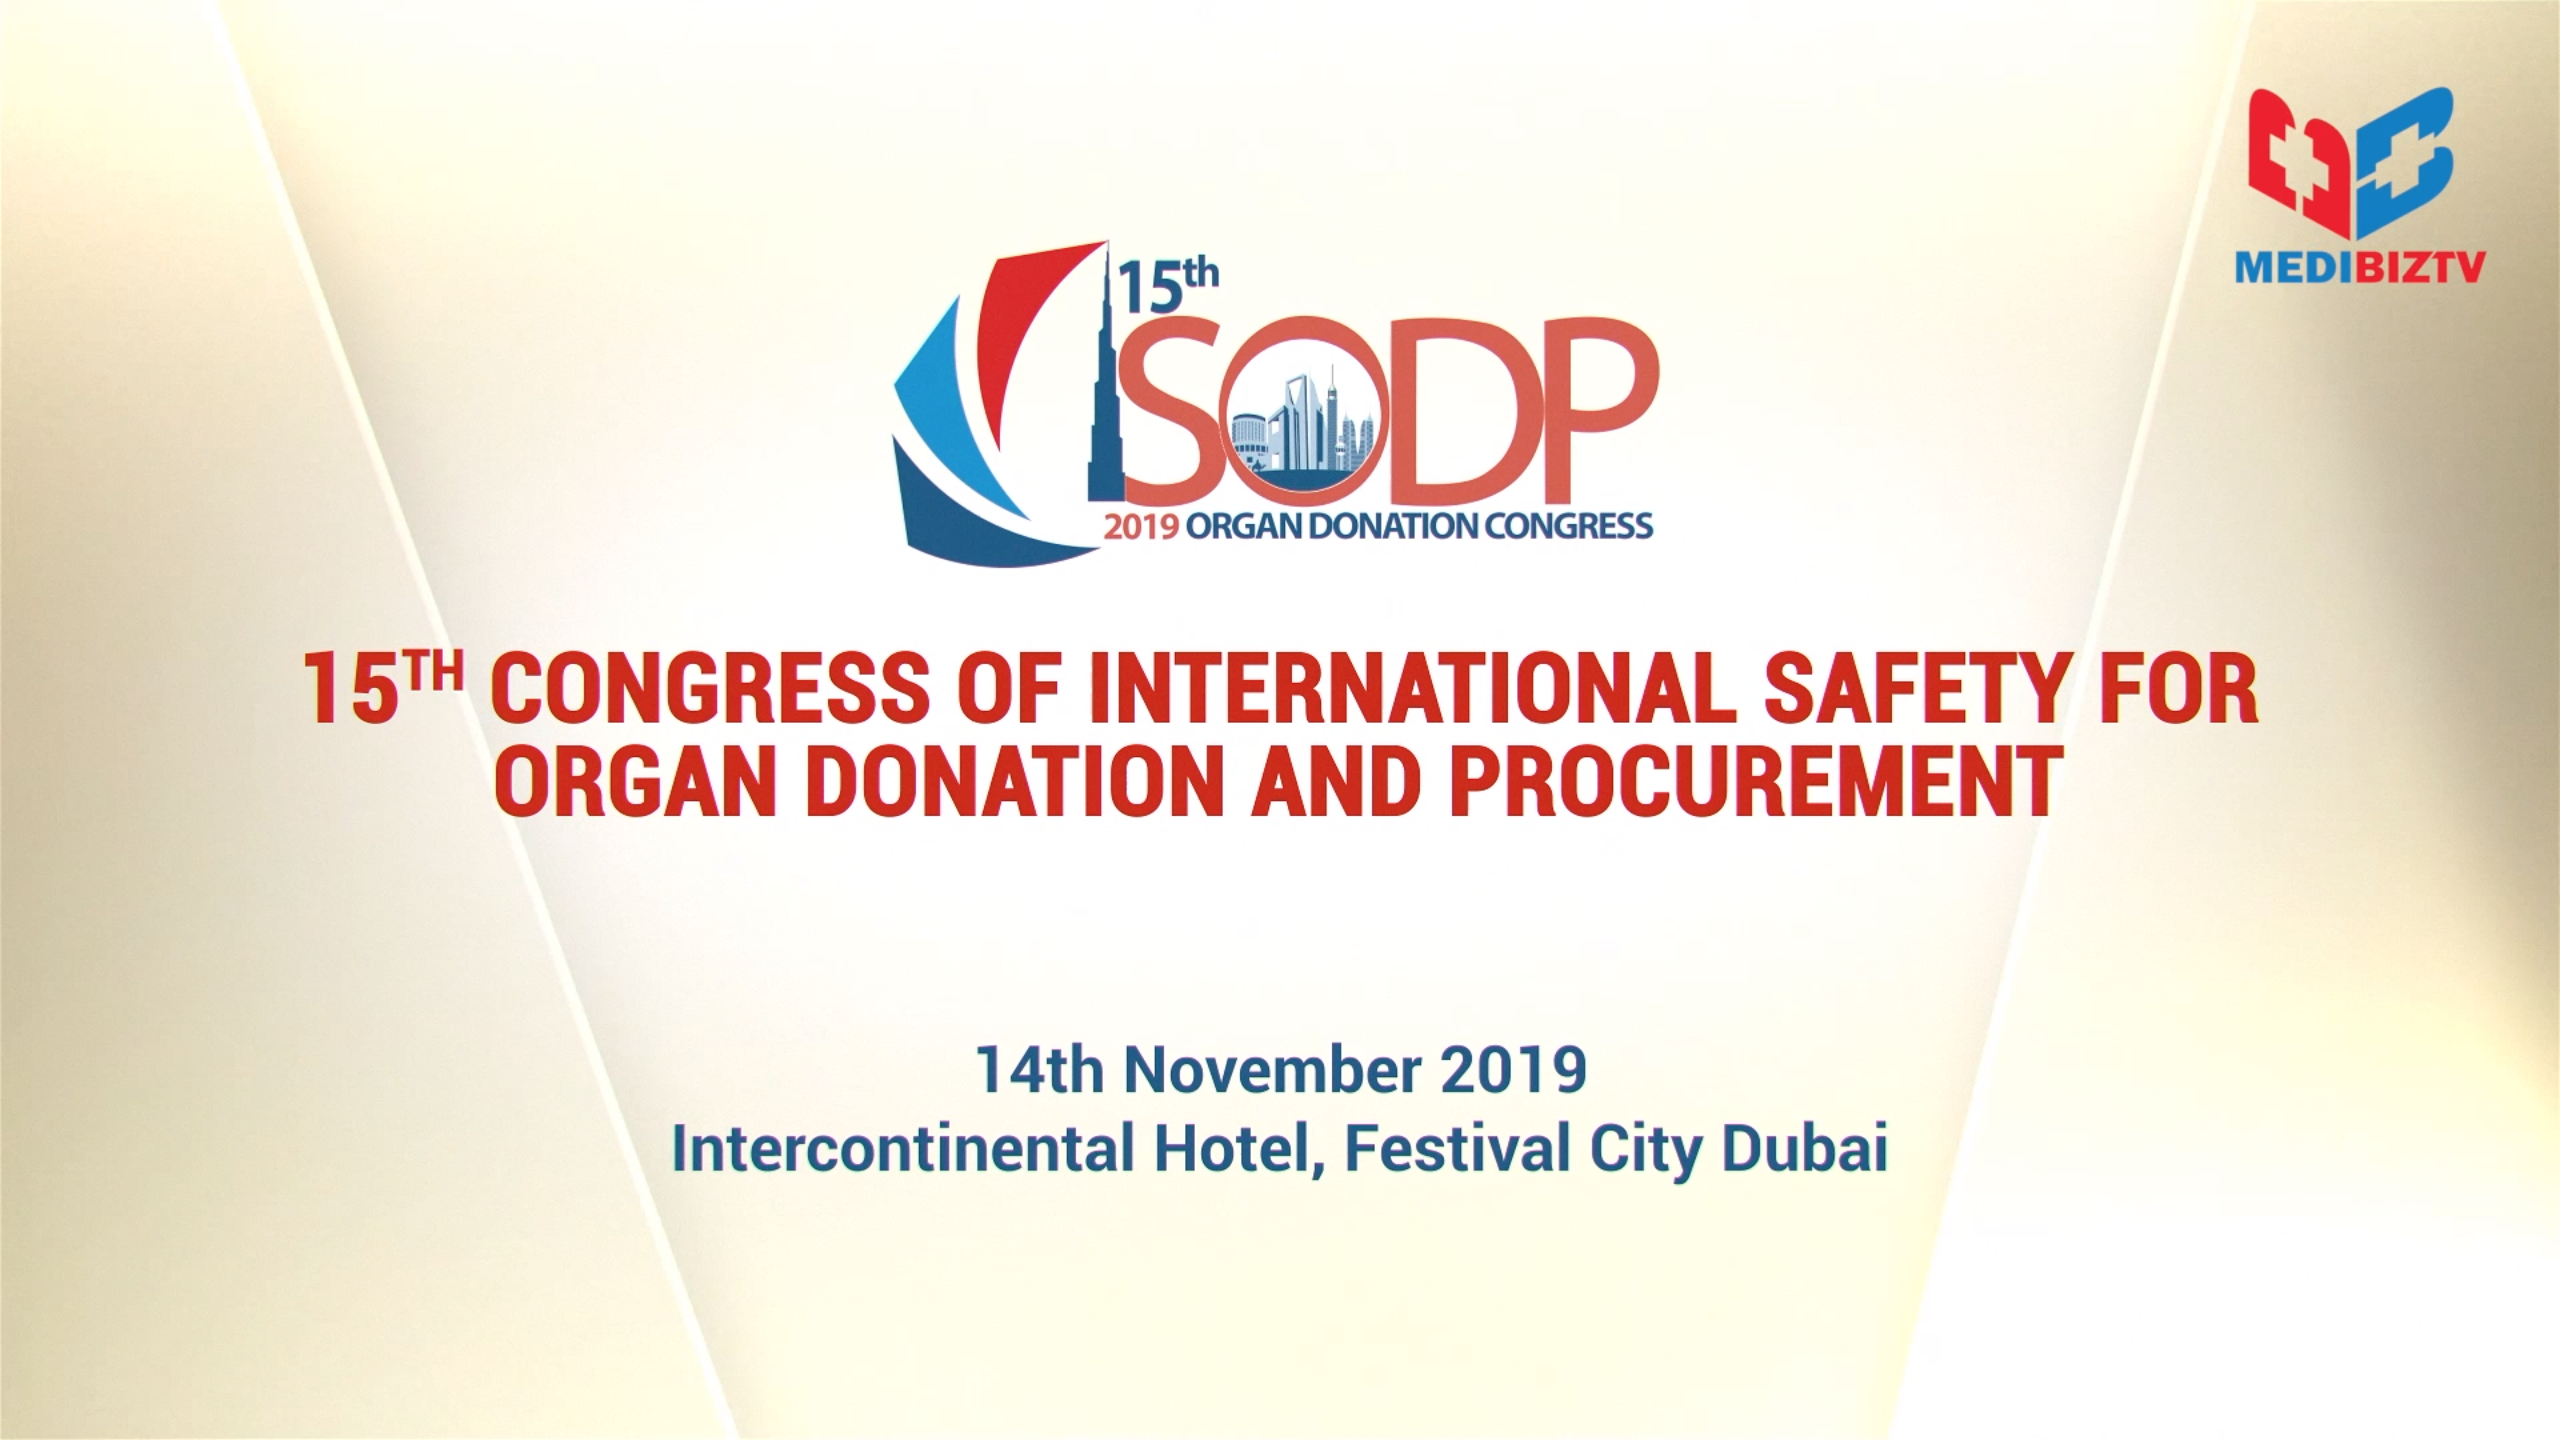 15th Congress of International Safety for Organ Donation and Procurement